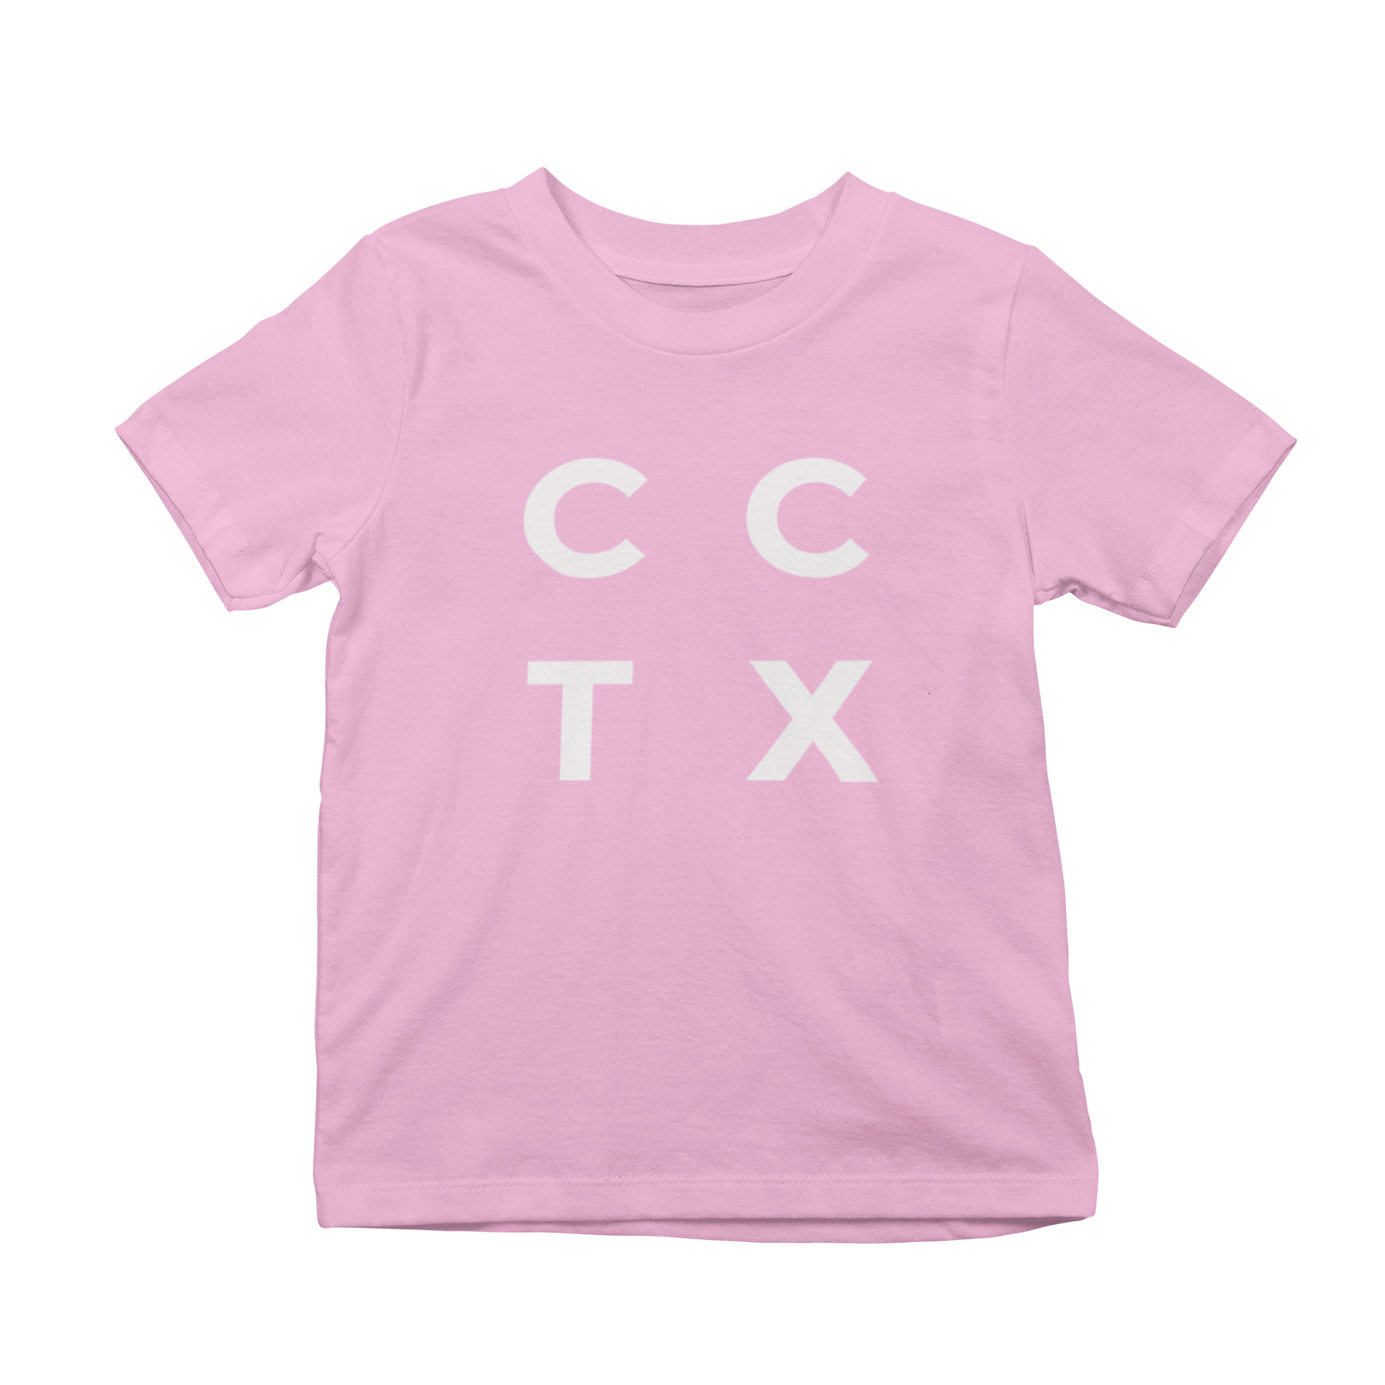 CCTX Stacked Toddler T-Shirts